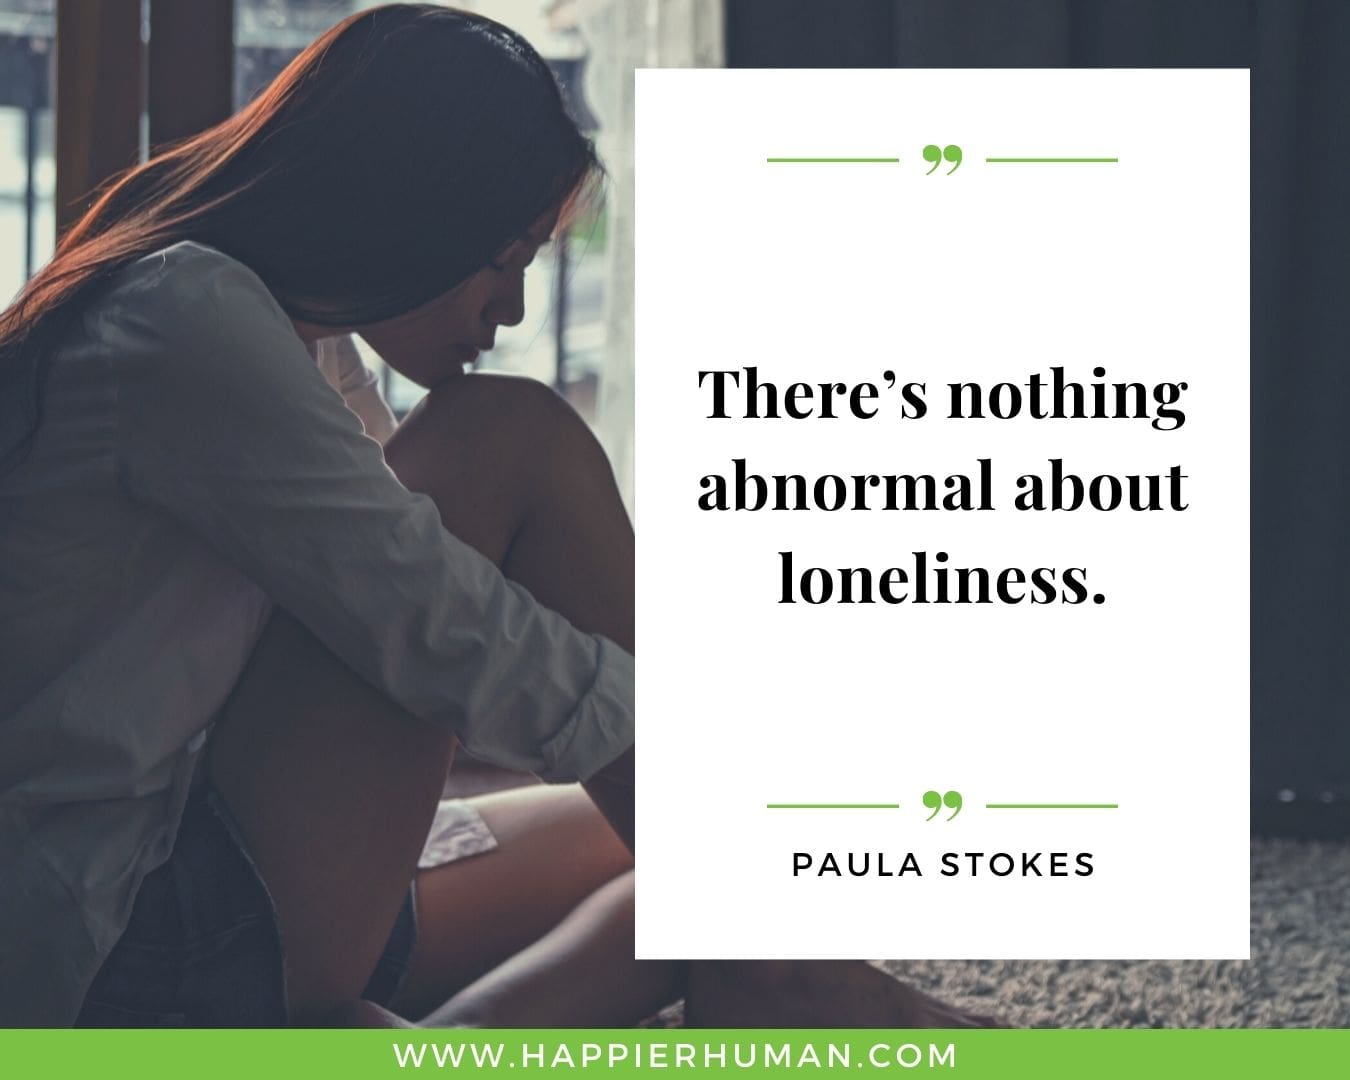 Loneliness Quotes - “There’s nothing abnormal about loneliness.” – Paula Stokes